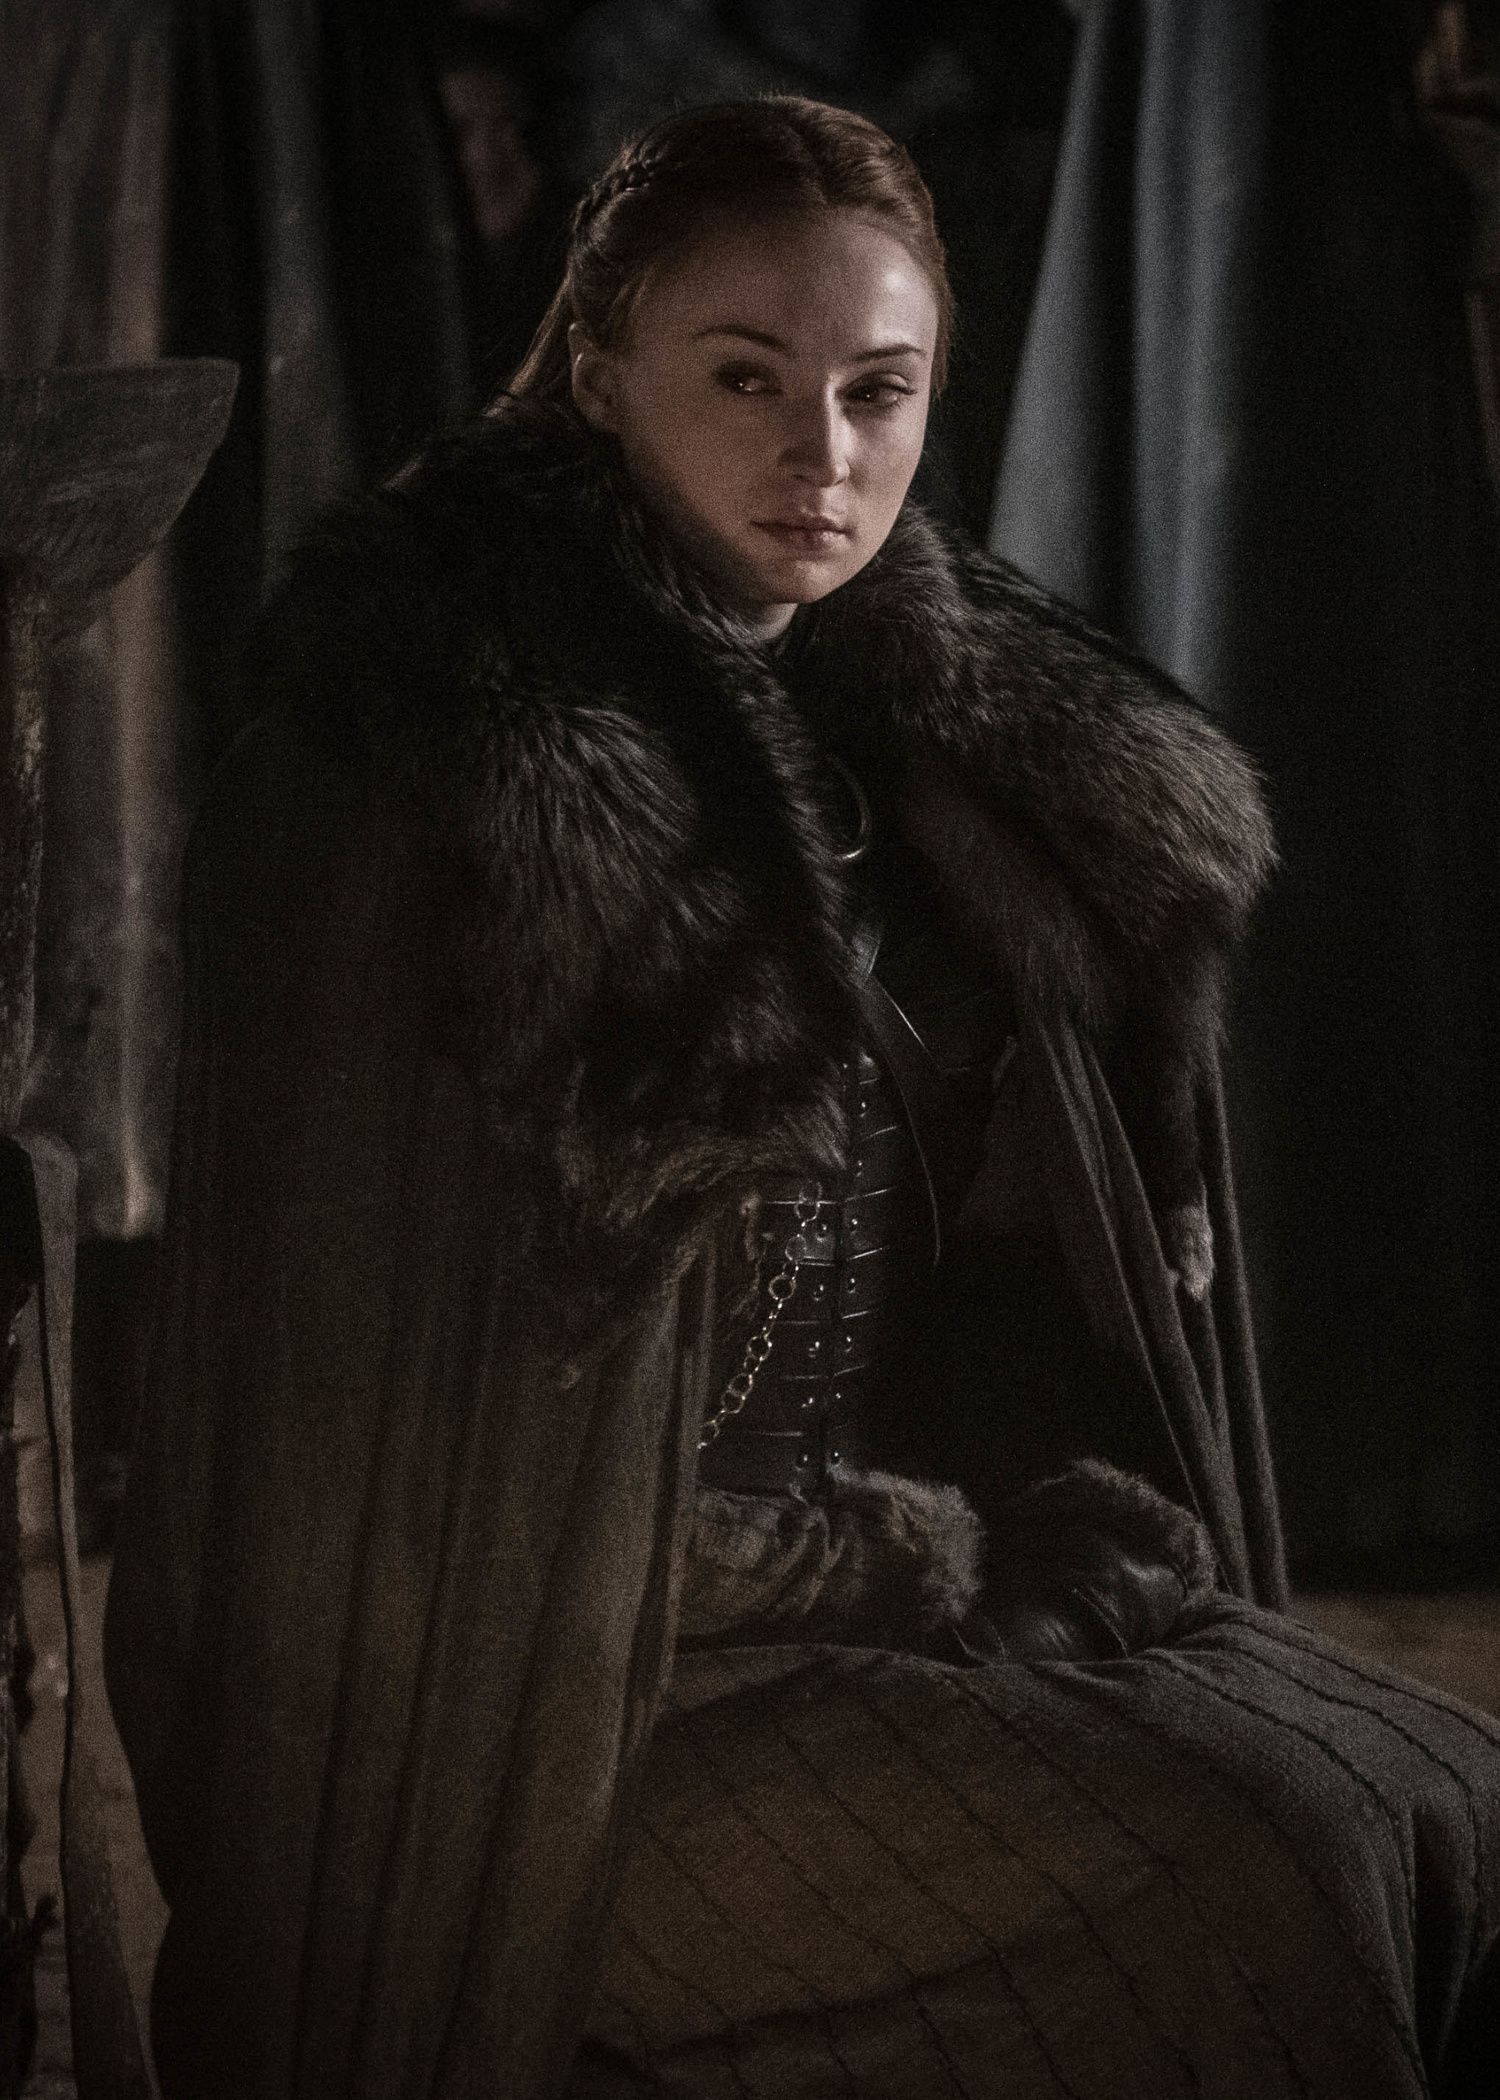 Game of Through Season 8 Episode 3 Images: The Battle of Winterfell